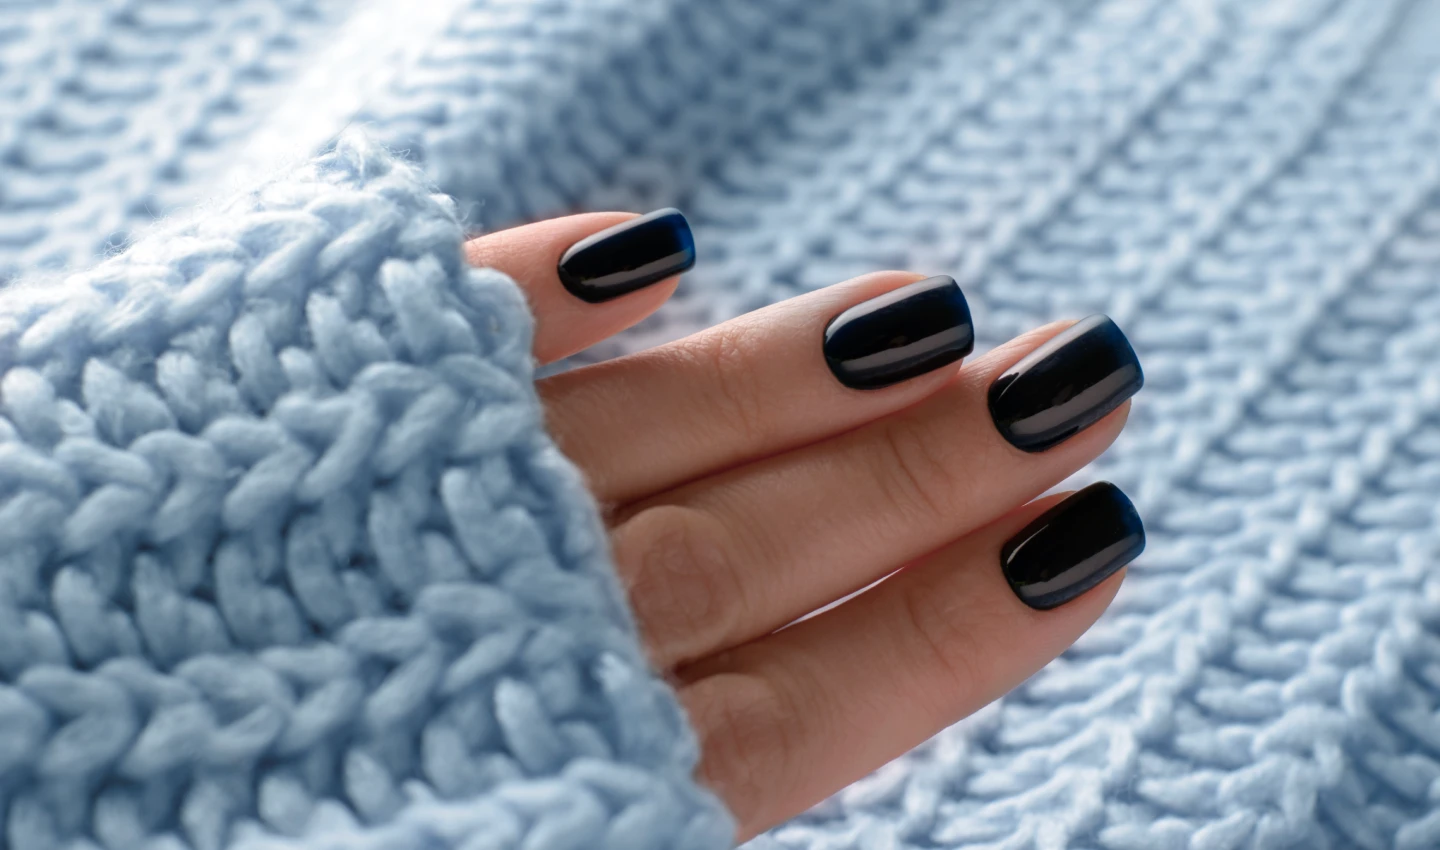 A hand with beautifully manicured nails, showcasing the results of a long-lasting manicure.